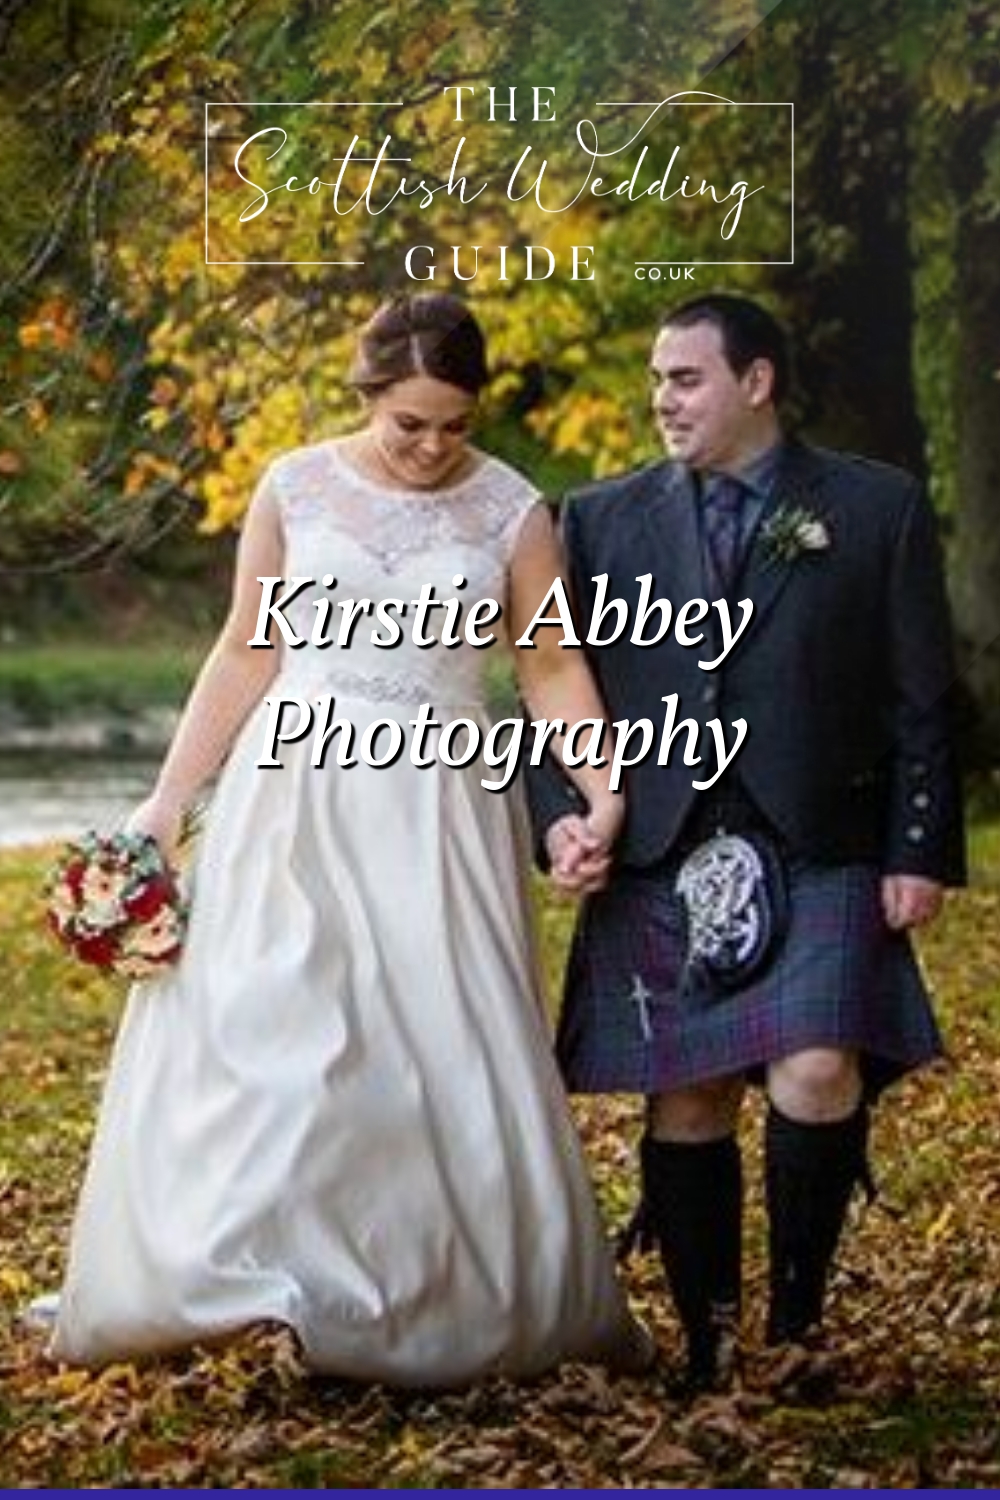 Kirstie Abbey Photography